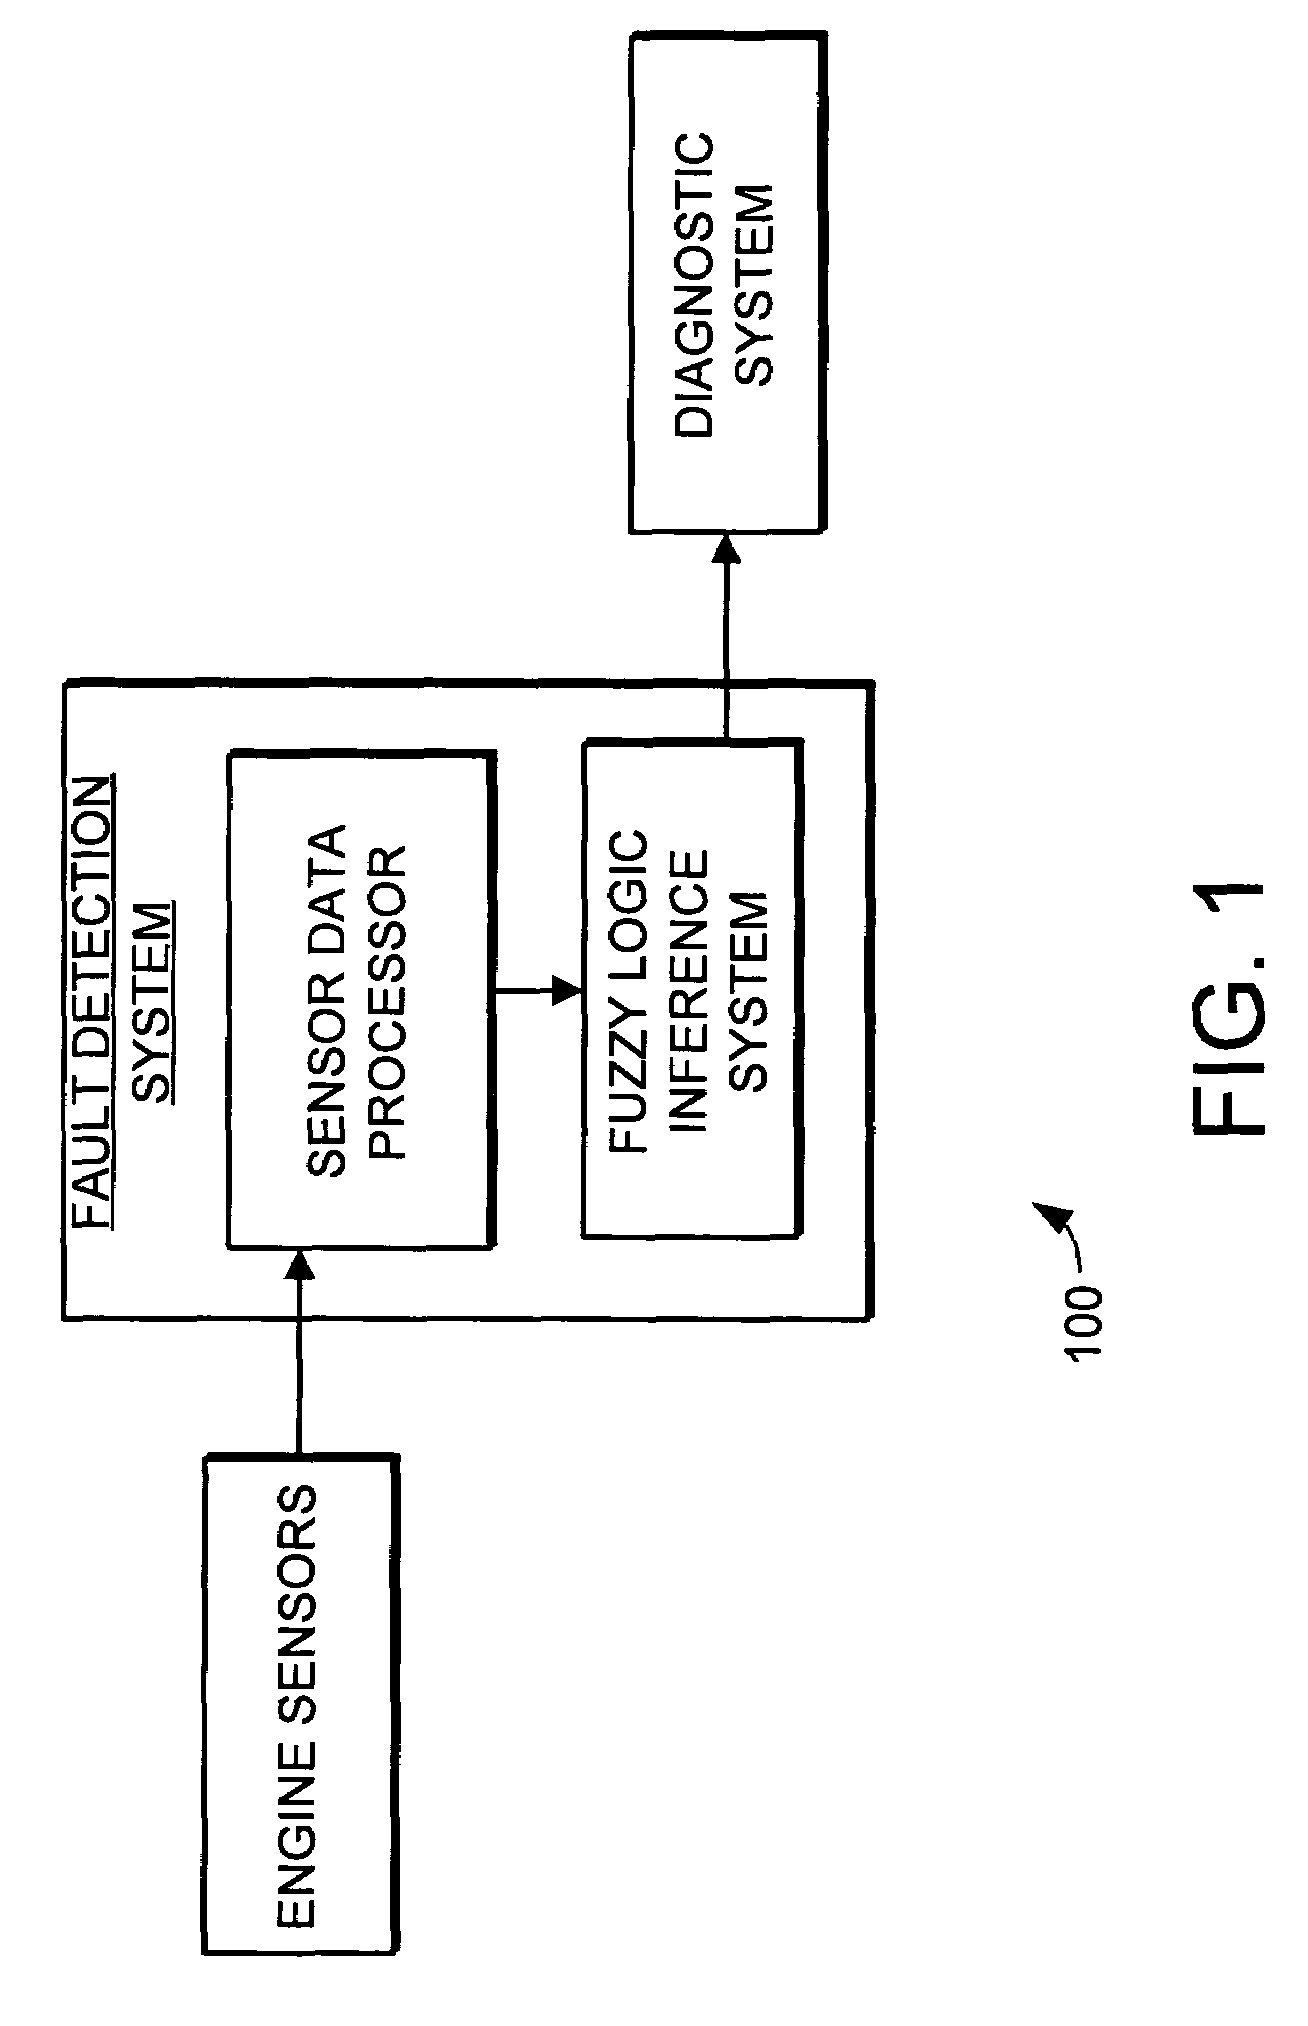 Fault detection system and method using augmented data and fuzzy logic